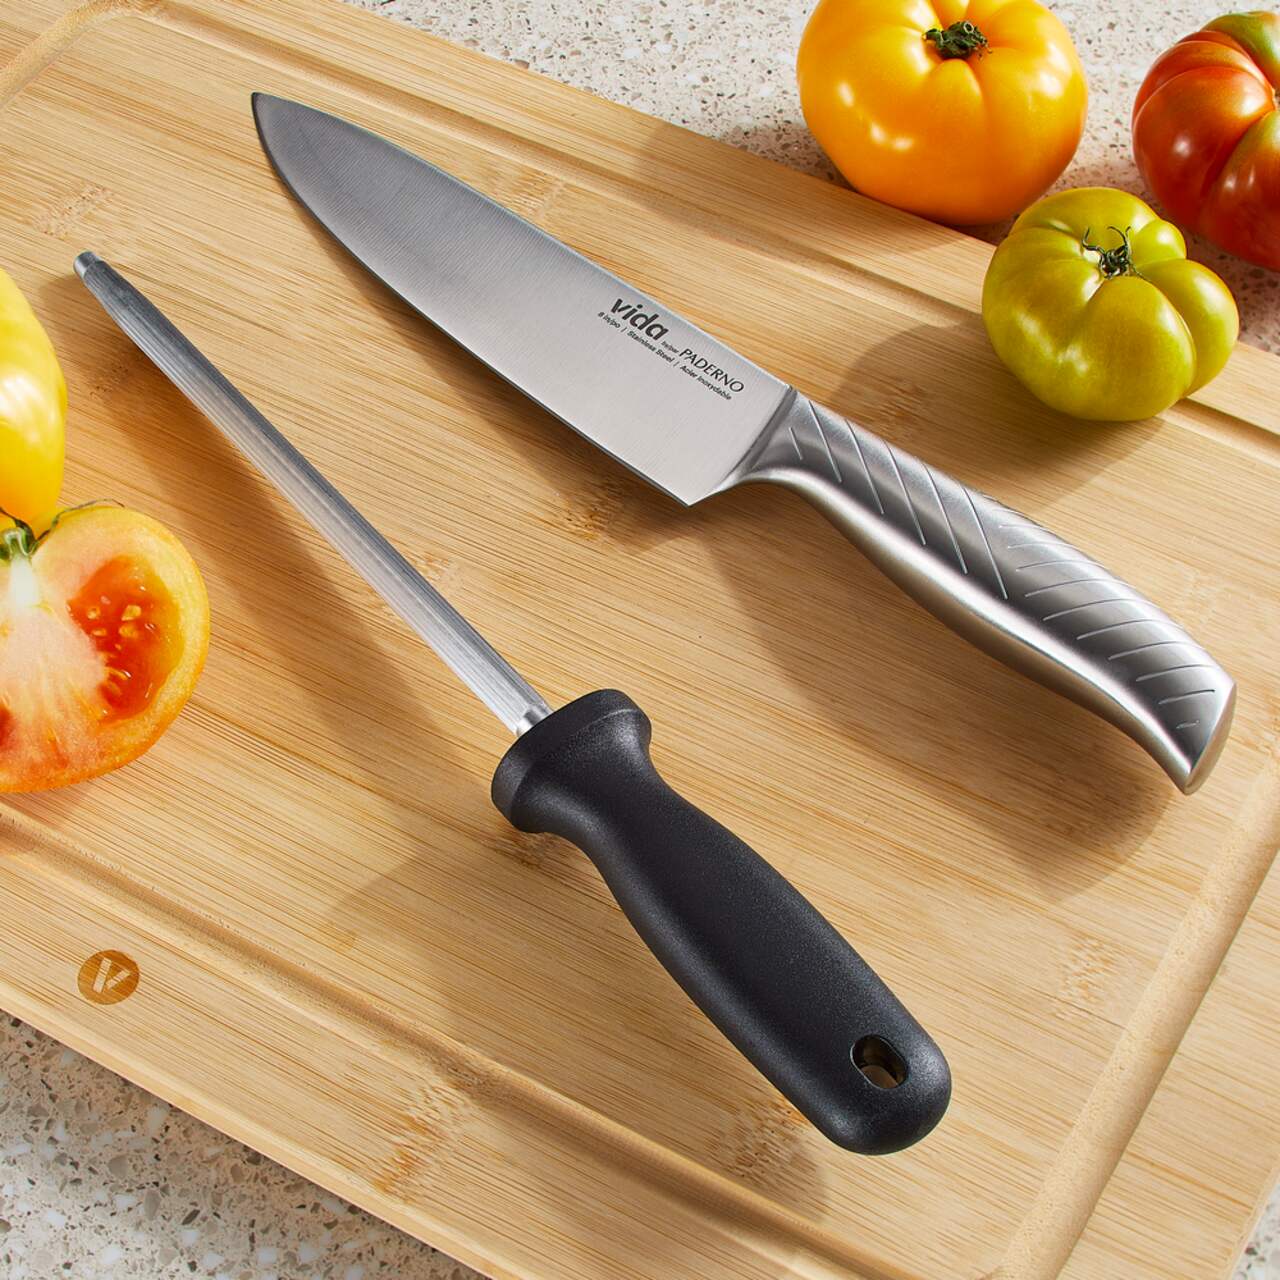 https://media-www.canadiantire.ca/product/living/kitchen/cutlery/1429572/vida-sharpening-steel-e2cceb66-ef83-4720-871b-ebbb2be6b8a8.png?imdensity=1&imwidth=1244&impolicy=mZoom